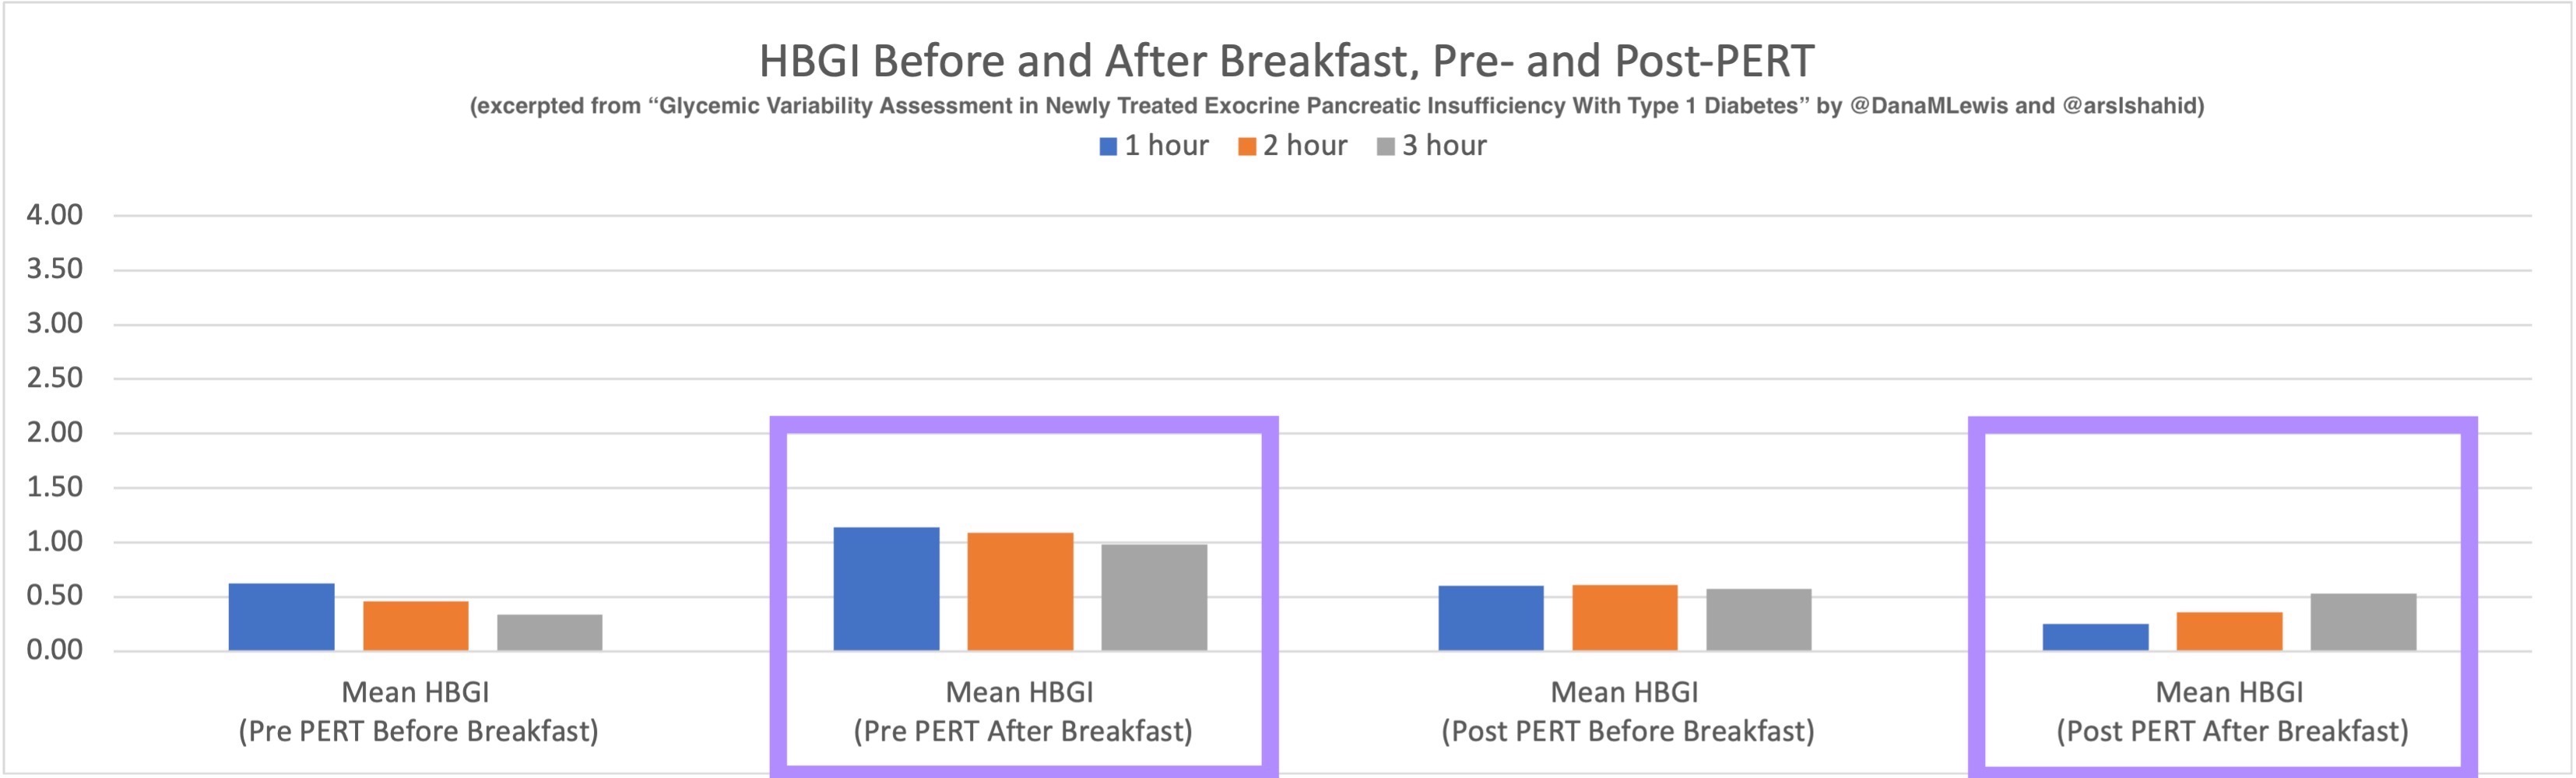 High Blood Glucose Index (HBGI) pre- and post-PERT for breakfast only, showing reduction in post-PERT after breakfast